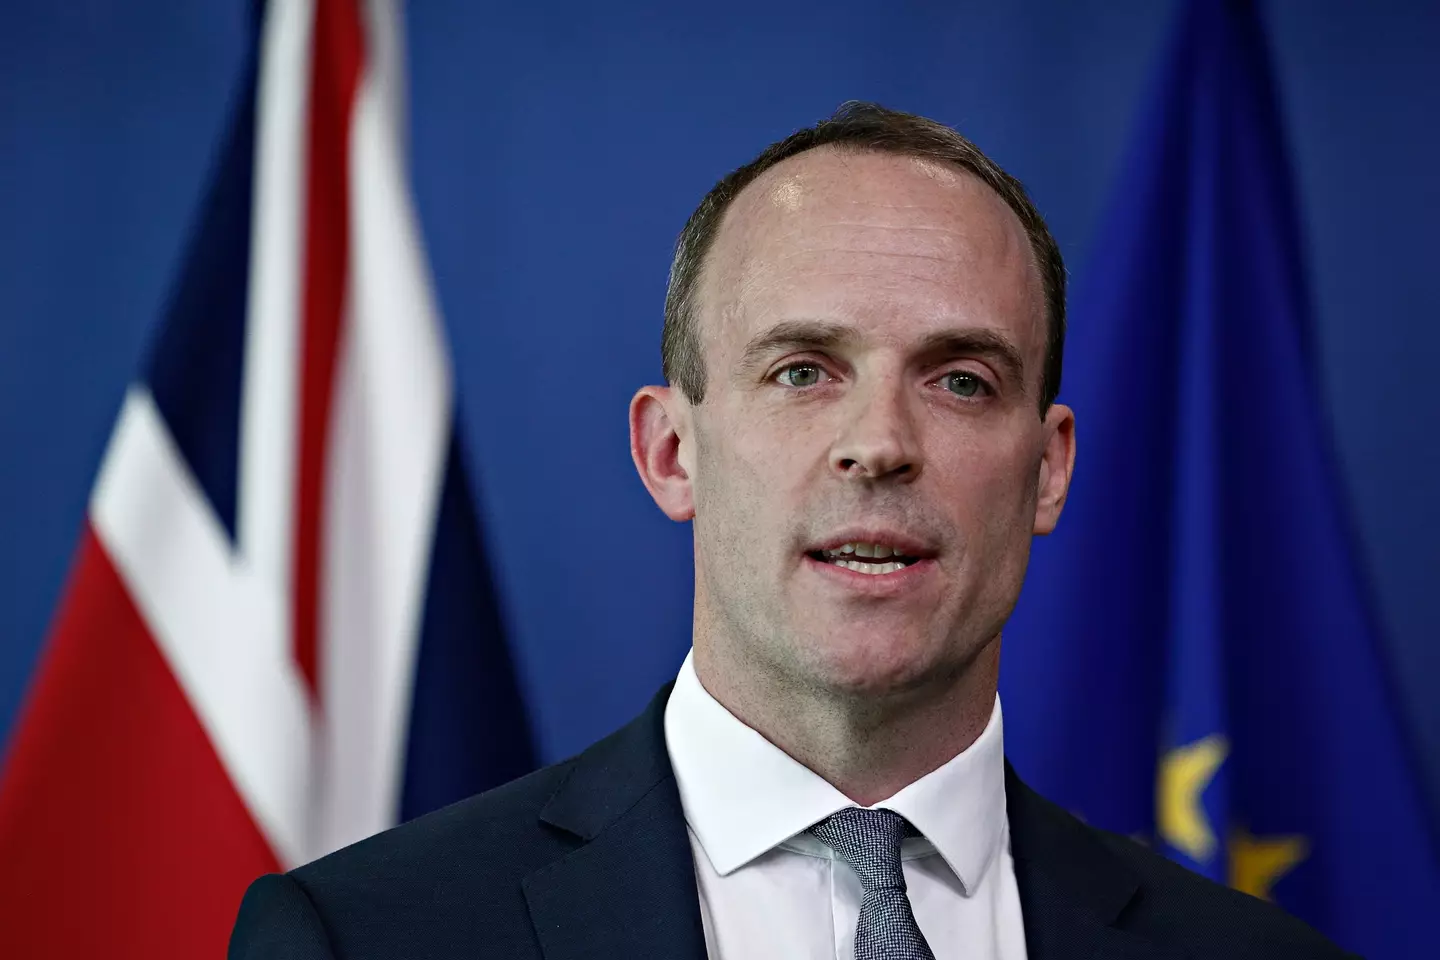 Dominic Raab said those responsible will 'now face the possibility of life behind bars'.